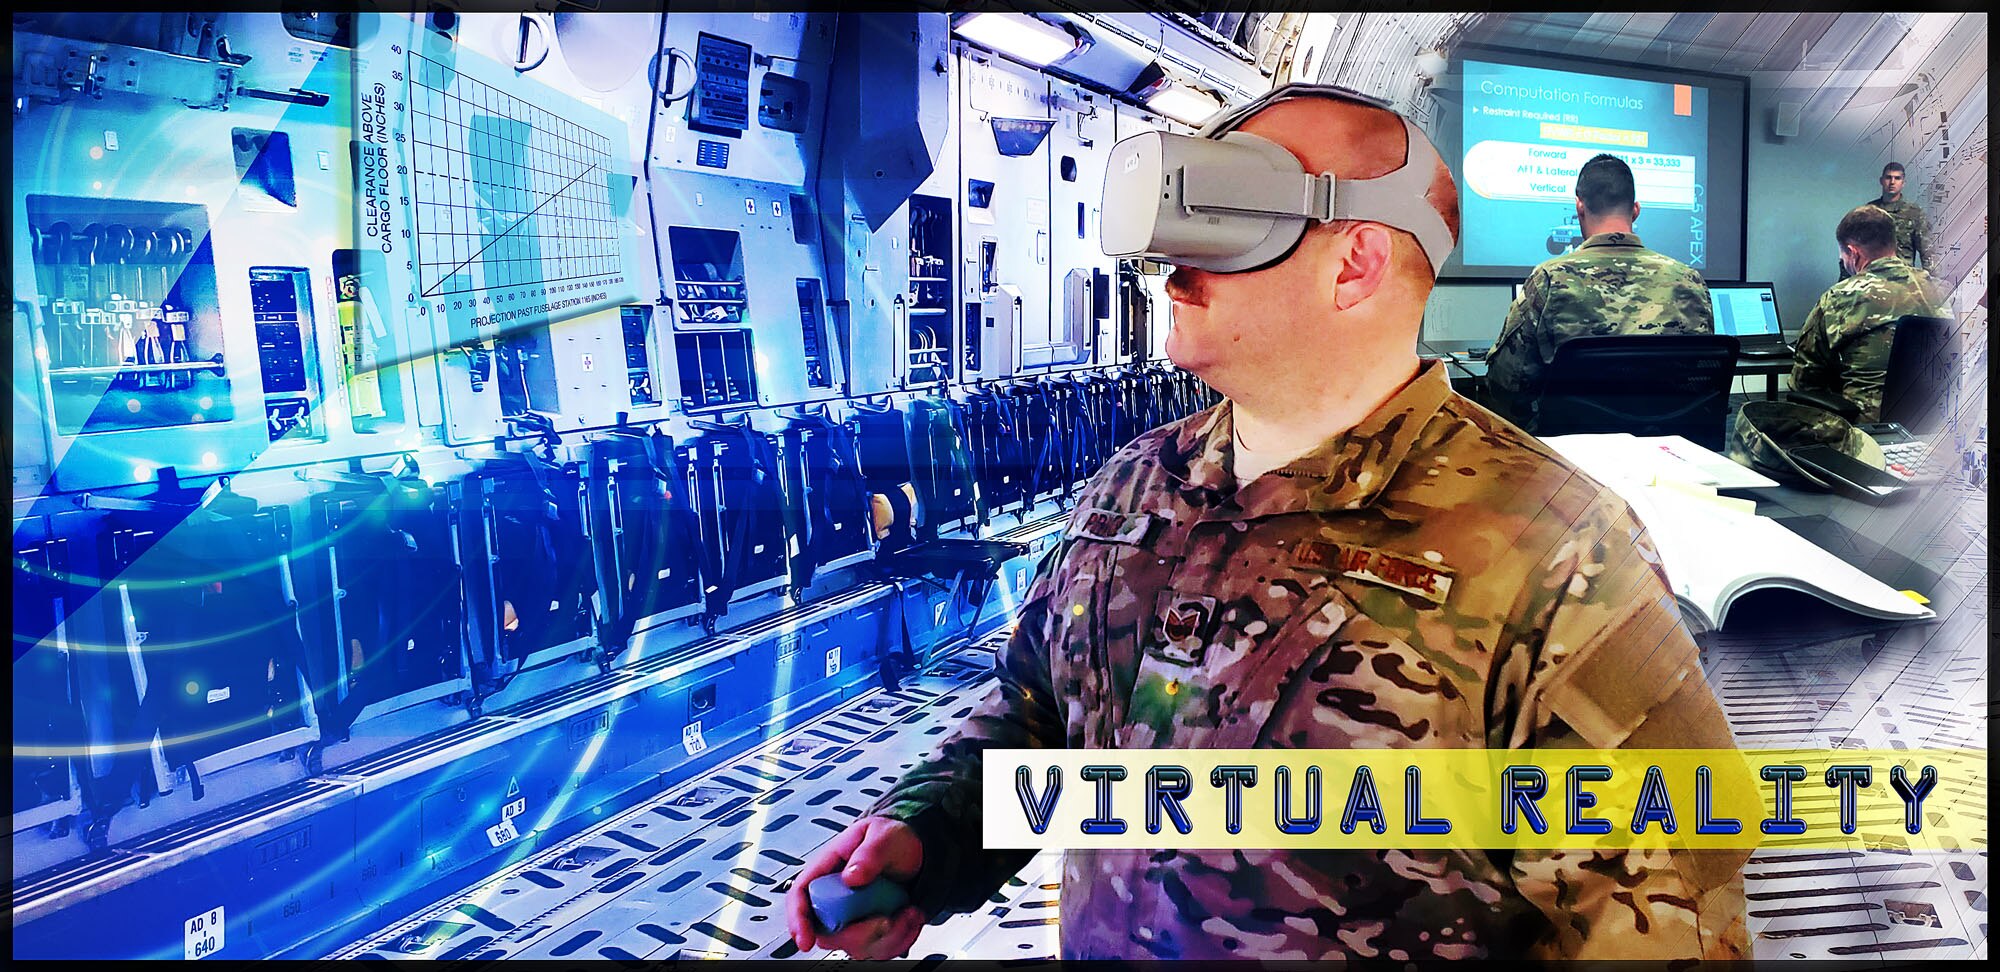 Virtual reality training started with a vision